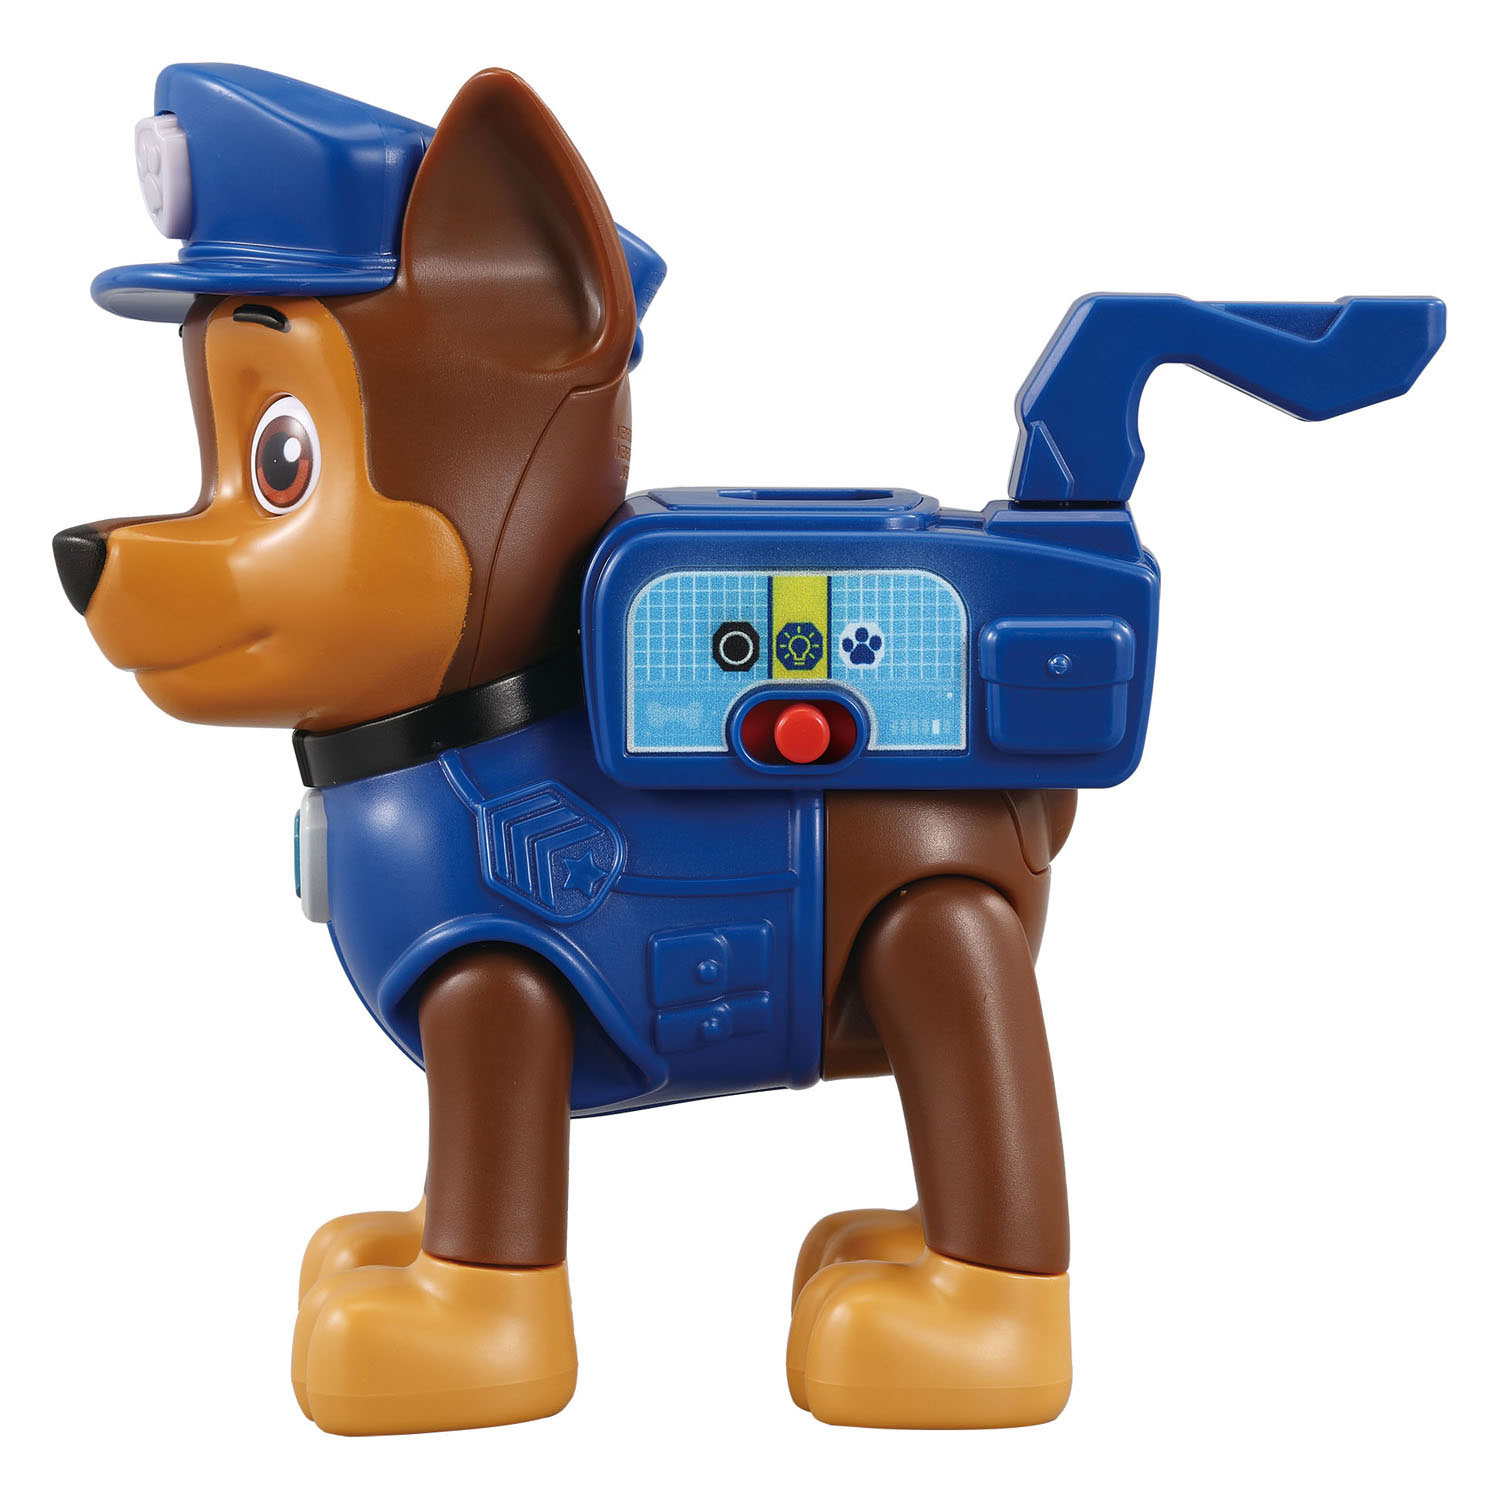 VTech PAW Patrol – Smartpup Chase Interactive